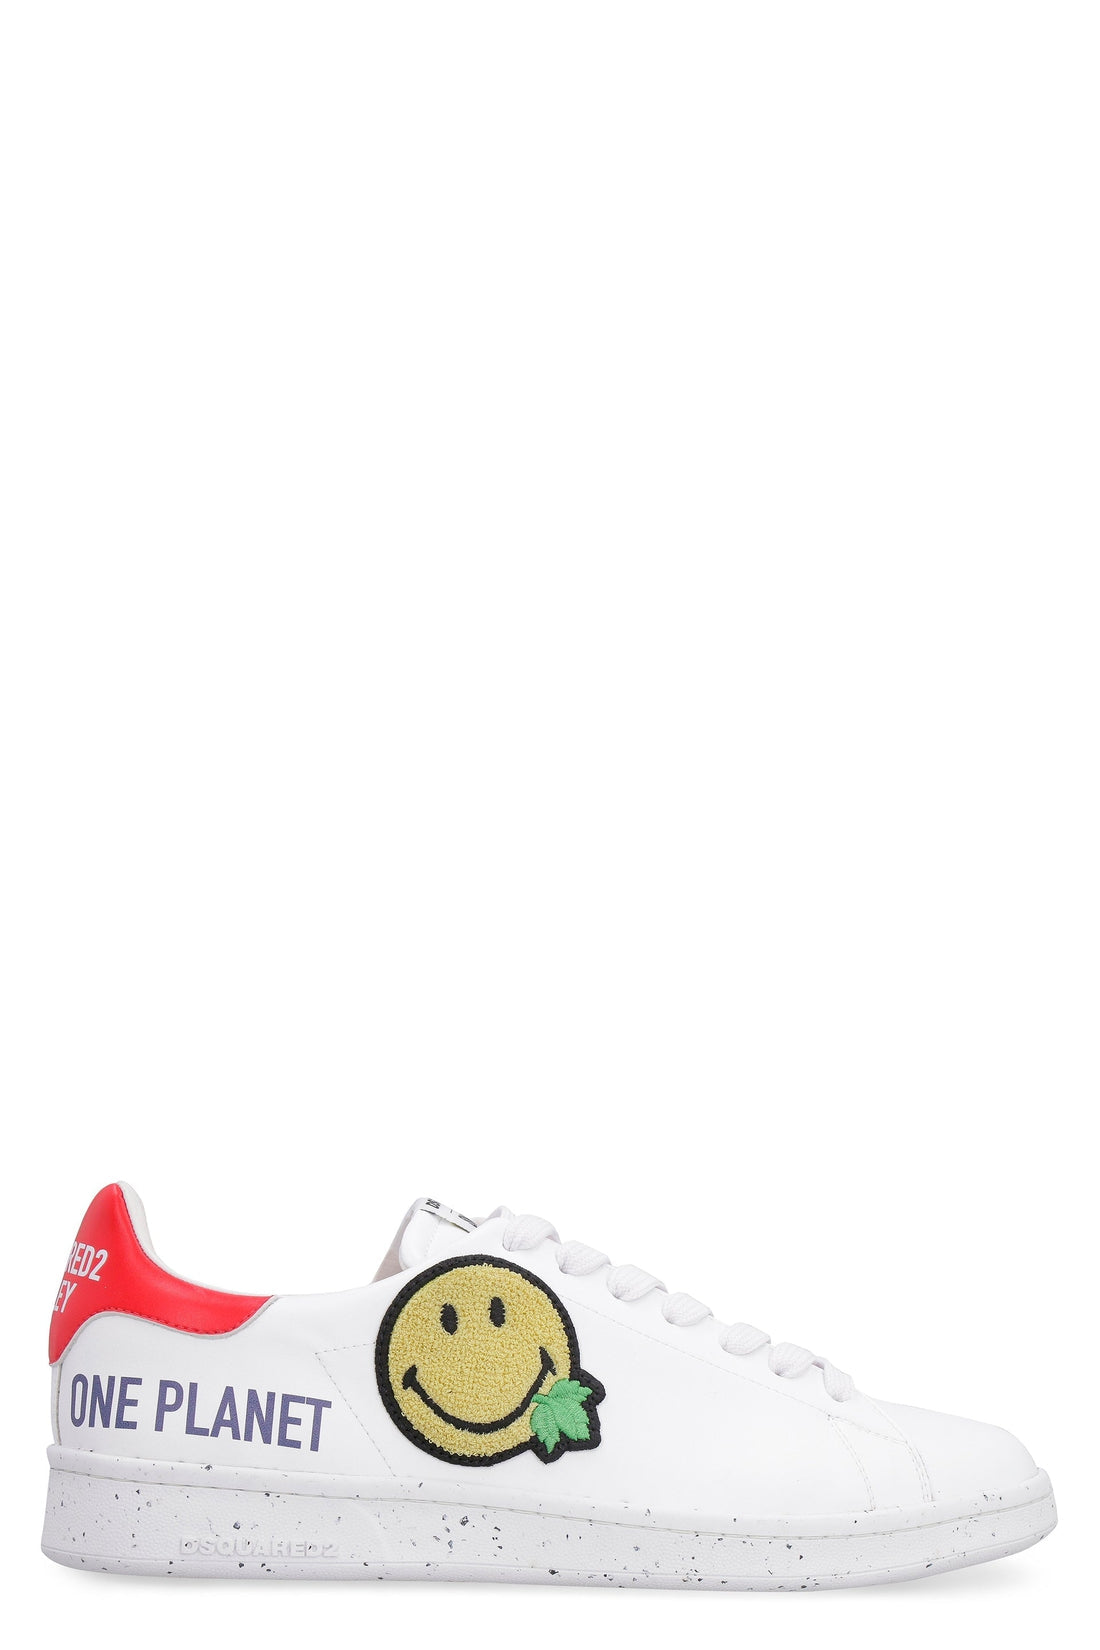 Dsquared2-OUTLET-SALE-Smiley - Leather low-top sneakers-ARCHIVIST